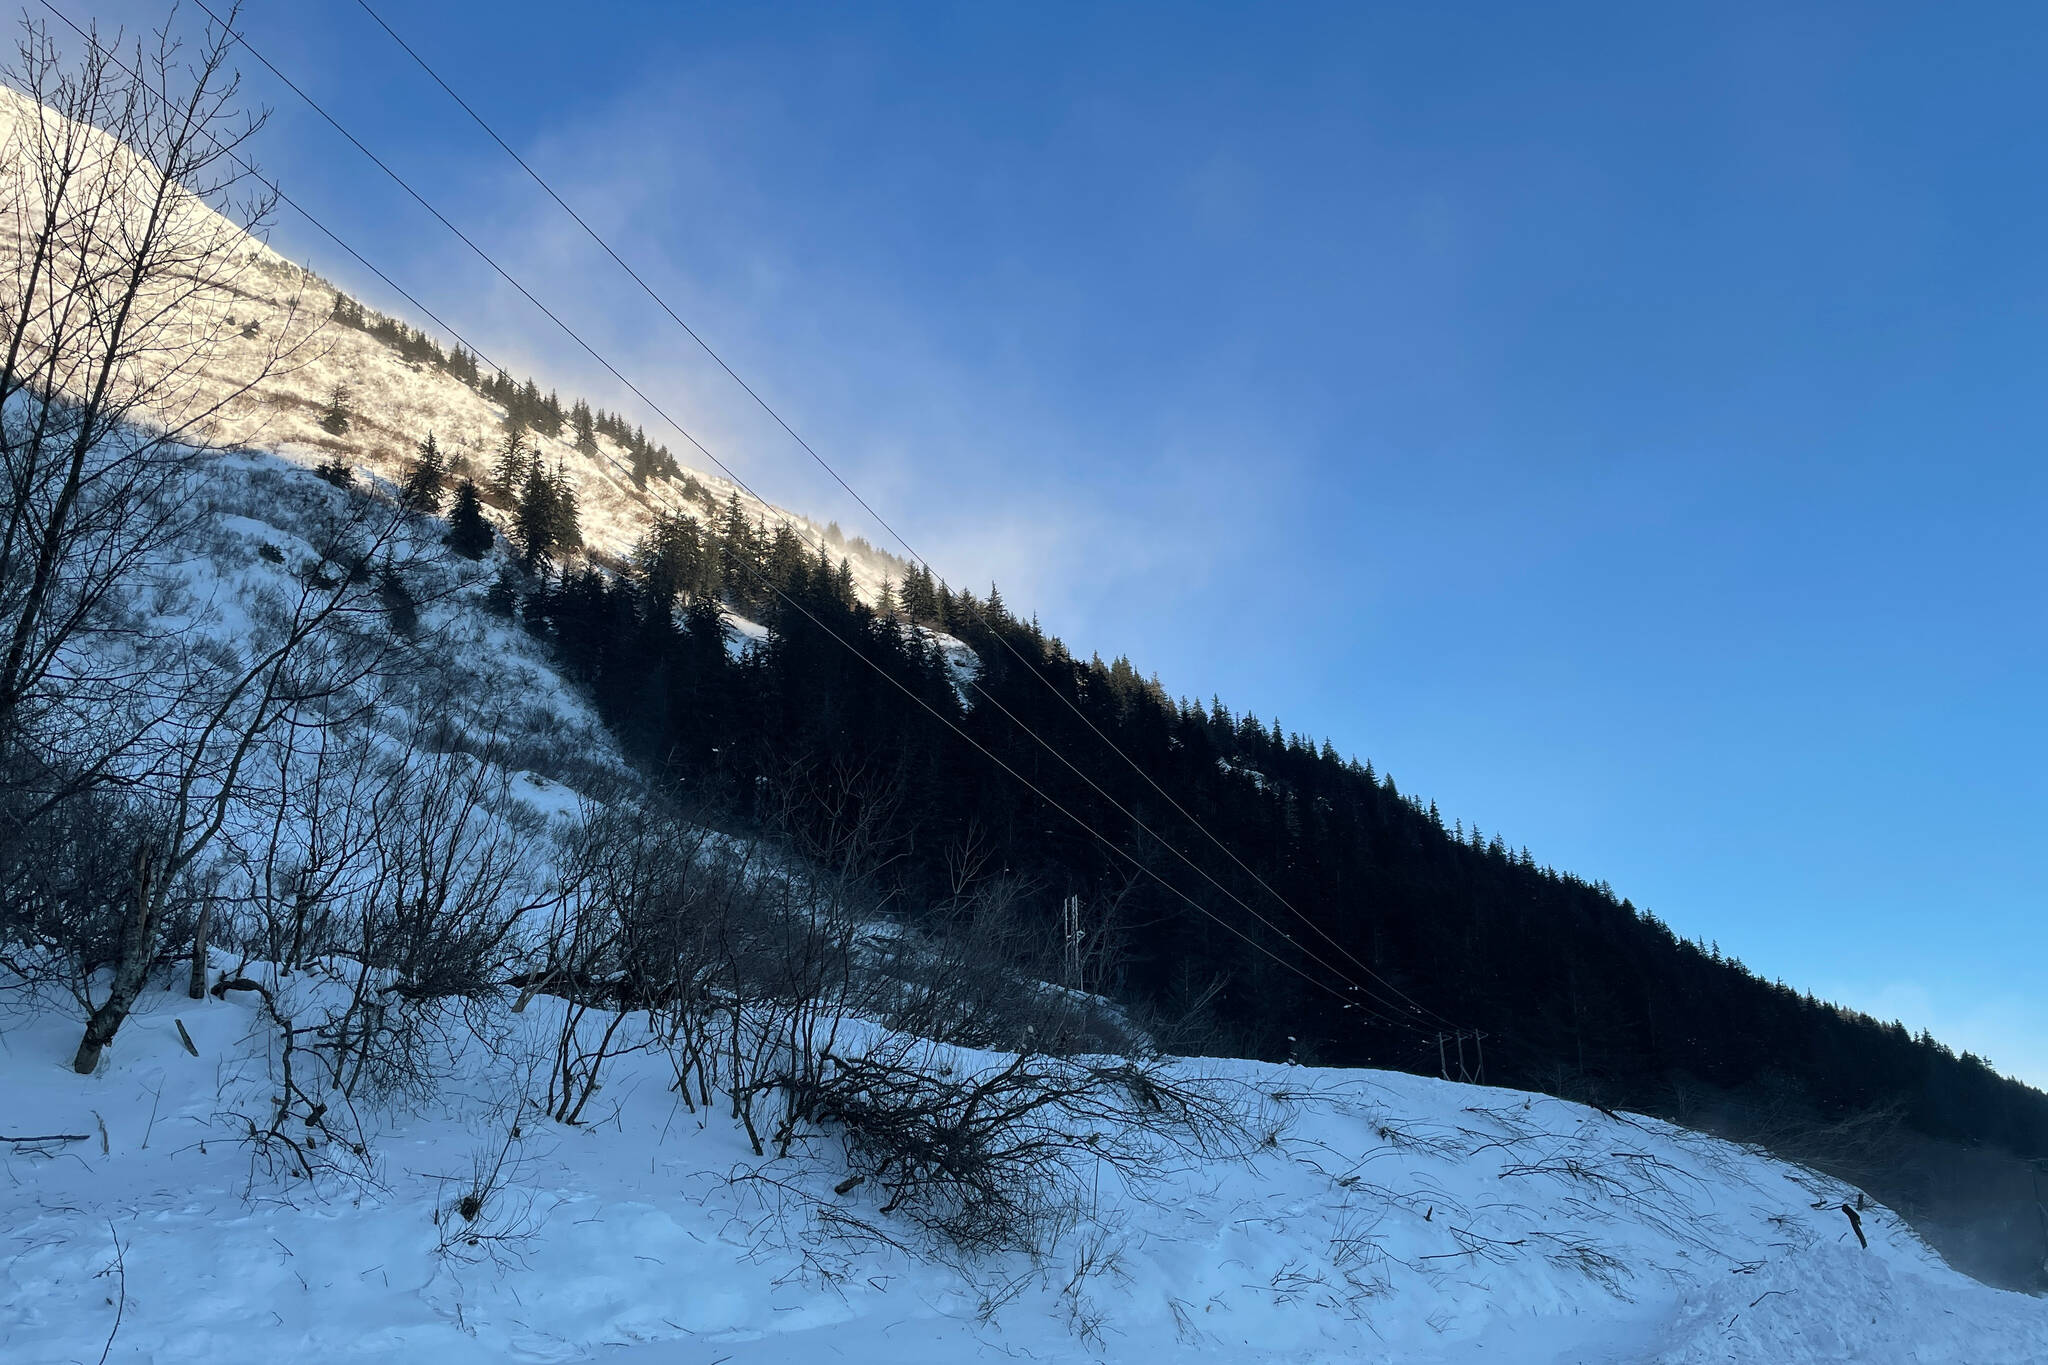 Snow blows off Mount Roberts high above the Thane avalanche chute, where an avalanche blew across the road during a major snowstorm last weekend. (Michael S. Lockett / Juneau Empire)